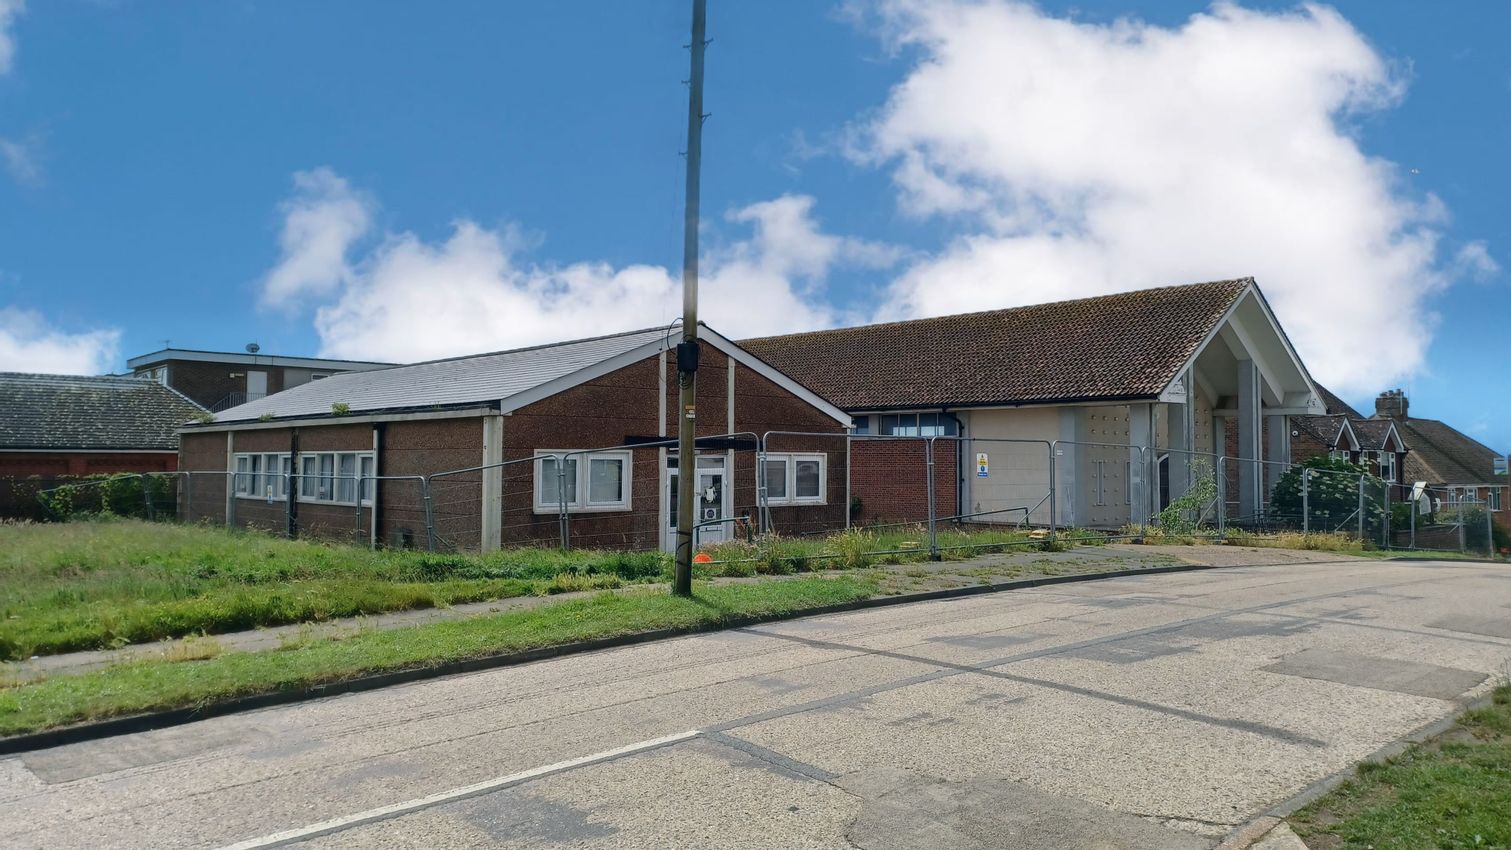 Church Hall, Ninfield Road, Bexhill-On-Sea, Sidley, East Sussex, TN39 5HG